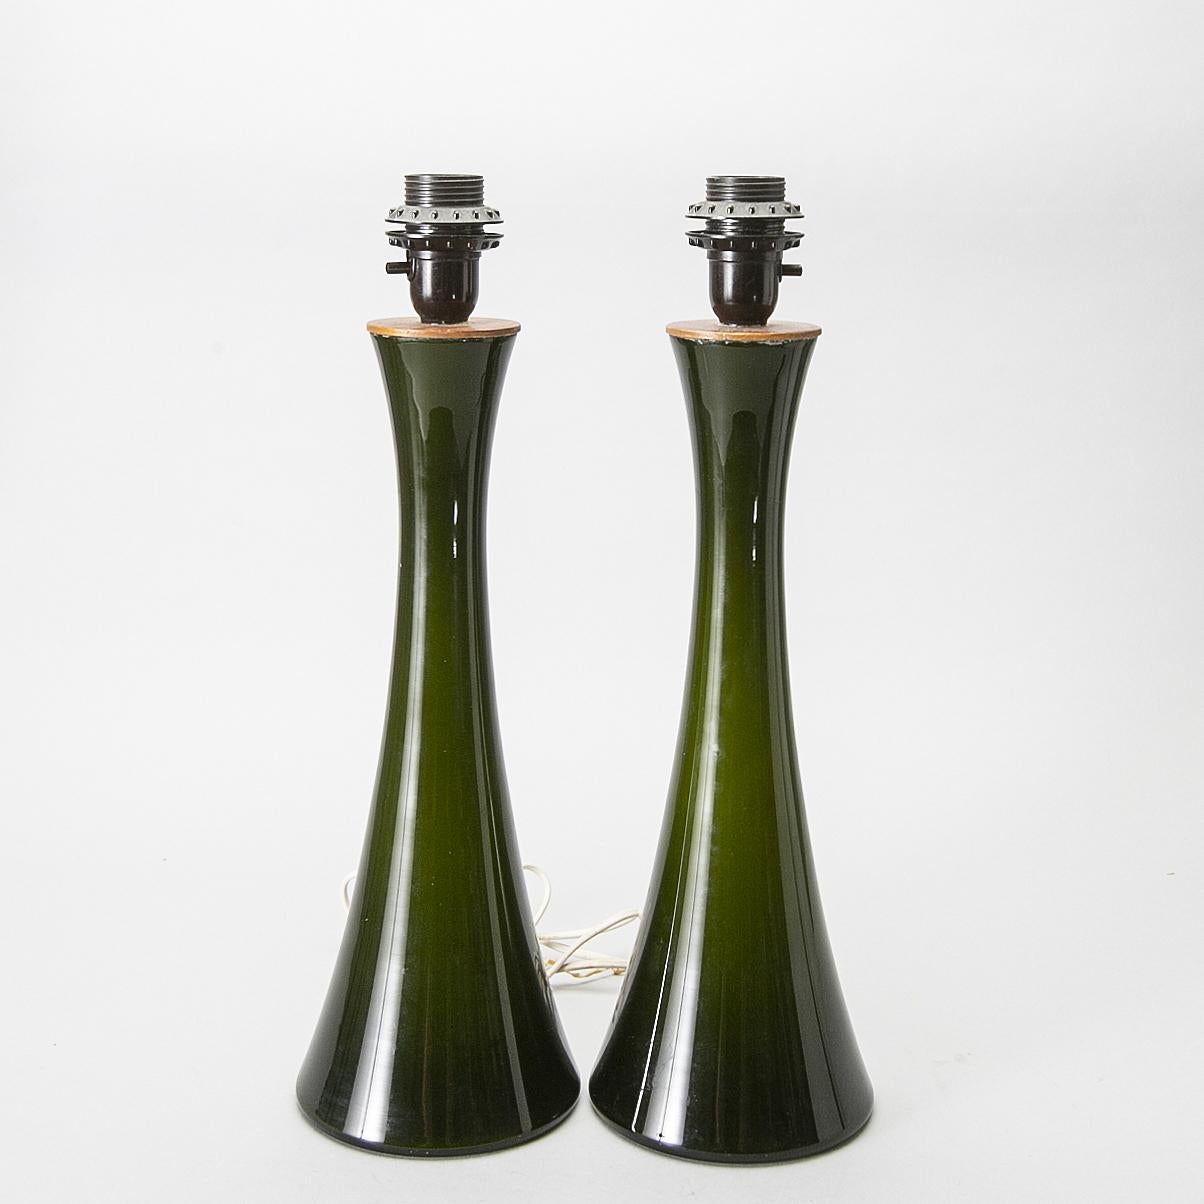 Berndt Nordstedt, pair of glass lamp, Bergboms, 1970 midcentury

Swedish lamps
Green tinted glass with teak details.
Measures: Socket height 40 cm
Height with shade 62cm
Bottom diameter 14cm
Label marked.

Shades are included 

  